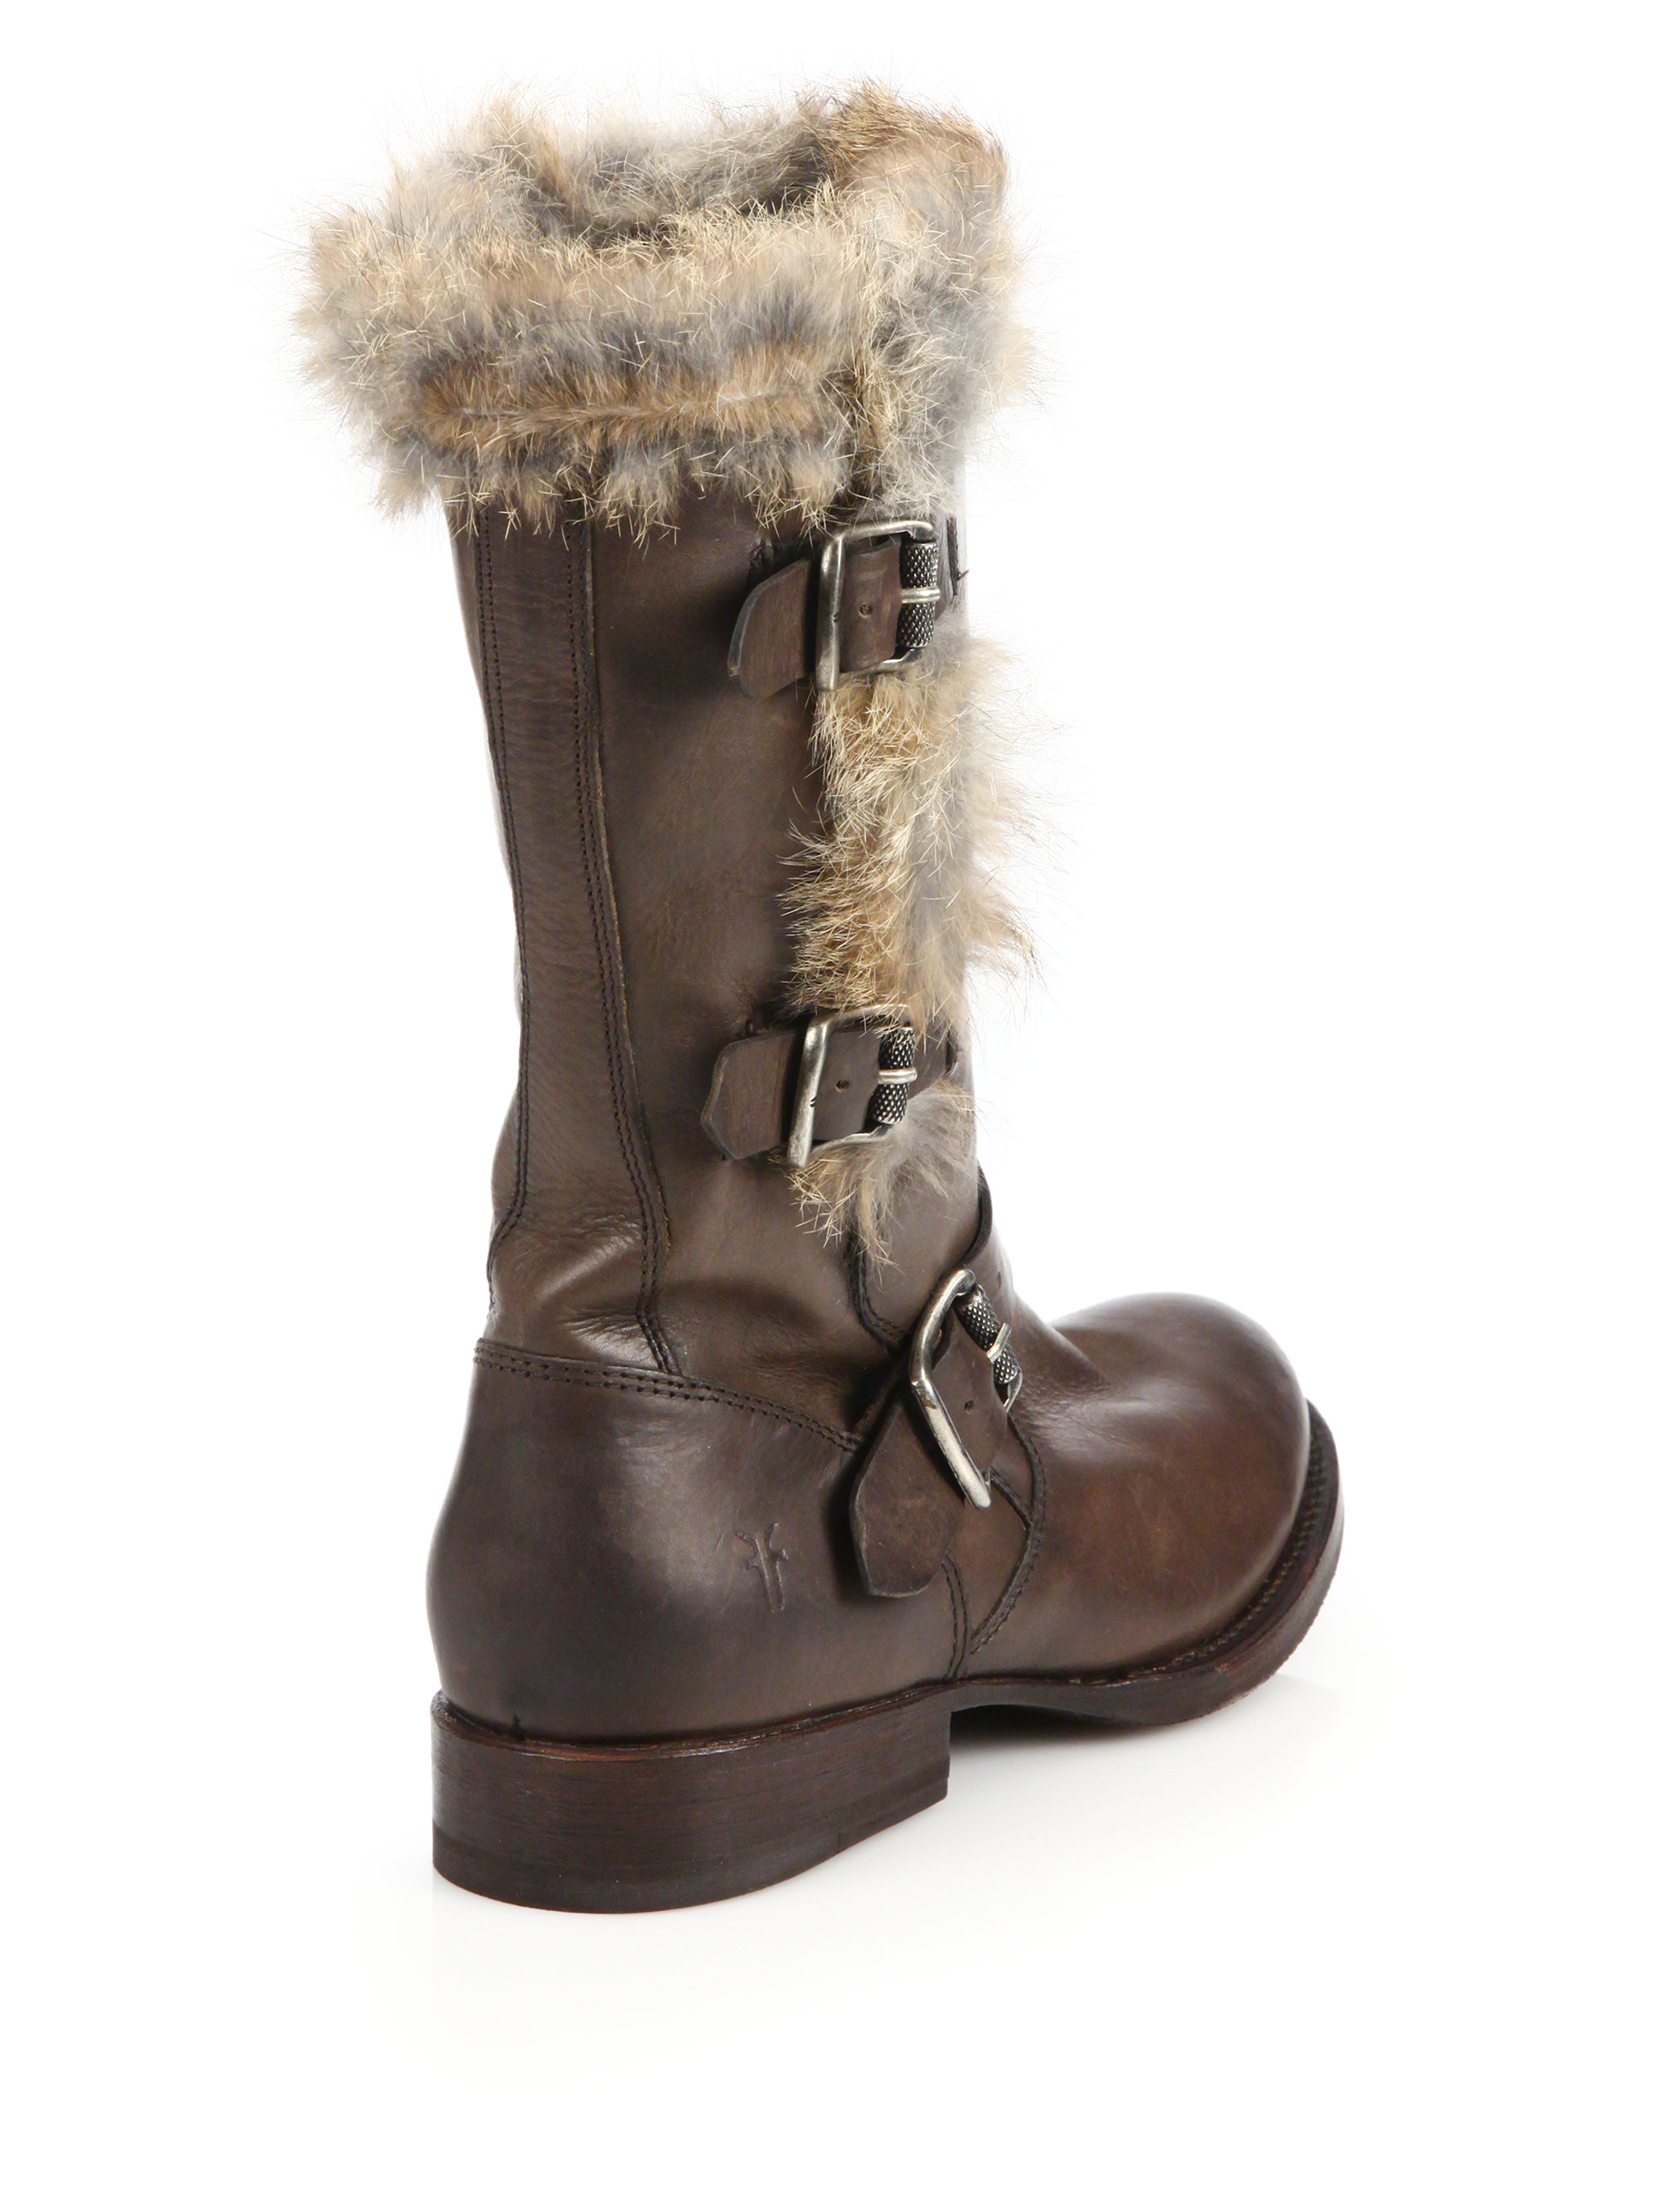 frye boots with fur inside